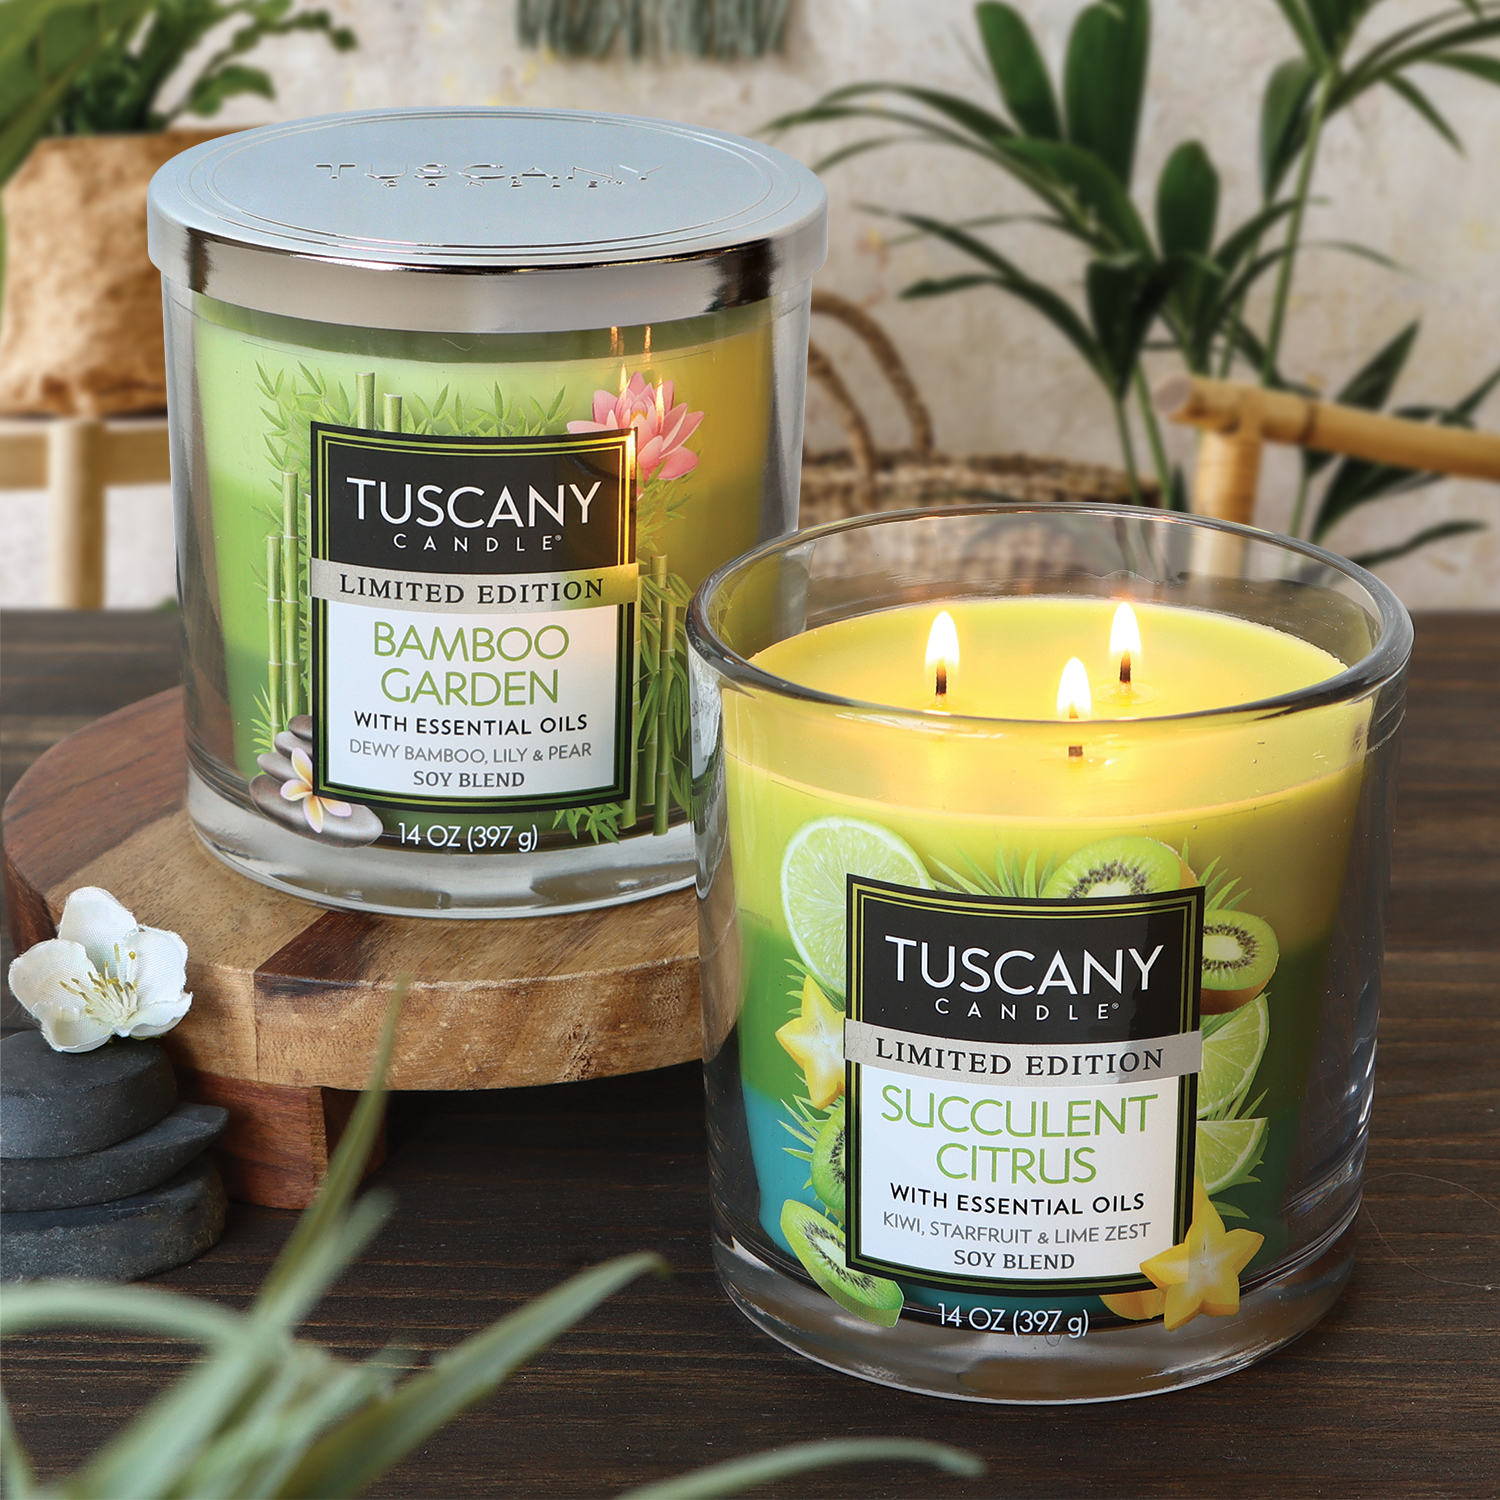 Two Tuscany Candle® SEASONAL Bamboo Garden Long-Lasting Scented Jar Candles, displayed on a wooden table, both unlit with the lids removed.